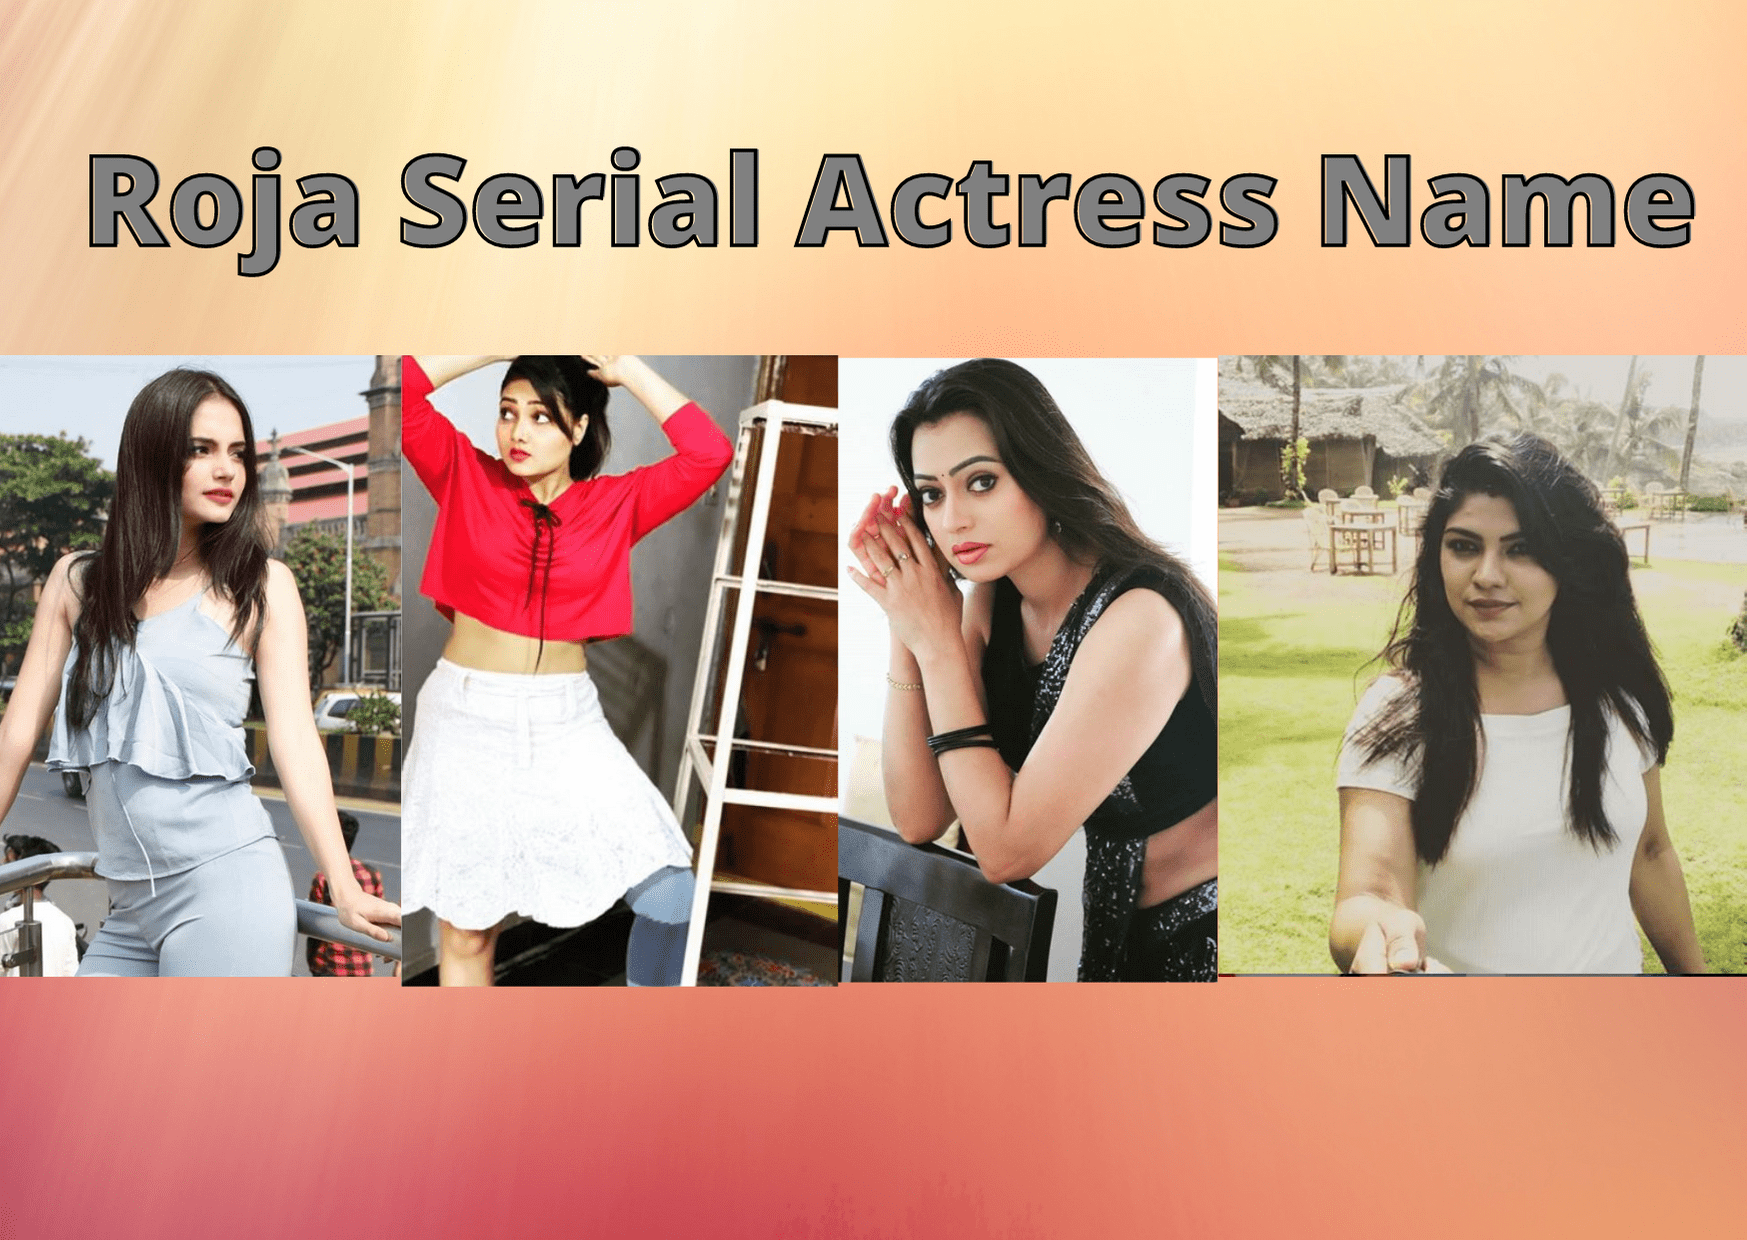 Roja Serial Actress Name Roja Serial Actress Name Saregama produced the serial Roja which was premiered on 9 April 2018 on SUN TV. It was a Tamil-language soap opera starting Priyanka Nalkari, Sibbu Suryan, and Shamily Sukumar. Here are the name and images of the actress in the Roja serial: Priyanka Nalkari View this post on Instagram A post shared by PRIYANKA NALKARI (@nalkarpriyanka) on Aug 16, 2020 at 9:01am PDT View this post on Instagram A post shared by PRIYANKA NALKARI (@nalkarpriyanka) on Aug 10, 2020 at 9:45pm PDT Shamili Sukumar View this post on Instagram Be the queen of ur own kingdom.....🥰. #rojaserial #serial #queen #suntvserial#villan #anu #priya A post shared by Shamili Sukumar (@shamili_sukumar) on Mar 18, 2020 at 9:53am PDT View this post on Instagram A post shared by Shamili Sukumar (@shamili_sukumar) on Jan 27, 2019 at 1:09am PST Gayathri Shastry View this post on Instagram Happy Father’s Day to my amazing better half. Vedha’s best friend (as she claims). 💓 A post shared by Gayathri Shastry (@shastrygayathri) on Jun 20, 2020 at 7:05pm PDT Sowmya Sharada [Episode 1-464] View this post on Instagram #throwback . . Good old days....... . . #chamundihills #nenjammarappathillai #vijaytelevision #vijaytv #rojaserial #suntv#tamilserial #tamilactress #memories #temple A post shared by Sowmya Rao (@sowmya.sharada) on Aug 24, 2020 at 11:54am PDT View this post on Instagram Good morning 🌞☀️.. happy weekend #vijaytelevision #vijaytvserial #vijaytv #suntv #suntvserial#tamilserial #tamilactress #happy #sareelove #weekend #loveislove A post shared by Sowmya Rao (@sowmya.sharada) on Sep 25, 2020 at 8:40pm PDT View this post on Instagram Happy gowri ganesh chaturthi to all..#nenjammarappathillai #vijaytelevision #vijaytvserial #vijaytv #roja #suntvserial #suntv #tamilserial #tamilactors #festival #ganesha A post shared by Sowmya Rao (@sowmya.sharada) on Aug 22, 2020 at 3:29am PDT Smriti Kashyap as Pooja Ashwin View this post on Instagram “Smile, it’s free therapy.” 😊 #sunday #white #peace #smilemore #face #happy #mood #like #love #doubletap #heart #instaday #oldpic #instamania #igdaily #igers A post shared by Smriti Kashyap🌸 (@iamsmritikashyap) on Aug 16, 2020 at 6:53am PDT View this post on Instagram Be your own kind of beautiful ✨💫 #fashion #pose #poser #blogger #model #white #green #love #goodhairday #instaday #instalike #instagram #instadaily #ig #fashionblogger #instablogger #instamood #igers #goodnight Pic courtesy @rahul__parmarr A post shared by Smriti Kashyap🌸 (@iamsmritikashyap) on Dec 10, 2019 at 9:38am PST Rekha Suresh as Theivanai Sethu View this post on Instagram In Roja serial A post shared by Rekha Suresh (@rekha.suresh.505) on Jul 24, 2019 at 10:19am PDT Dr. Sharmila as Shenbagam Manickam View this post on Instagram #pagalnilavu #shootingspot🎥 #vijaytelevision A post shared by Dr Sharmila (@drsharmila15) on Jan 7, 2019 at 9:11pm PST Nadhiya as Nathiya  View this post on Instagram #newpost #throwback #repost from @simply.nadiya Enchanting as always✨🖤 #EXCLUSIVE #perfectionist #nadhiya #nadhiyamoidu #love #actress🎬 #enchanting #enticing #lovely #pleasing #graceful #beautitious #actress #trendsetter #nadiya #vintageactress #nadhiyamoidu #zareena #gorgeousnadhiya #agelessbeauty #nadhiyalove #nadhiyaworld #nadhiyalife #nadhiyaforever #nadhiyaforareason #beautiful #evergreenactress #80sfashion A post shared by Zareena Moidu (@nadhiyamoidu_fc) on May 8, 2020 at 6:07am PDT View this post on Instagram Photoshoot from #ASK movie nadhiya and #umangjain cute pic😙 #nadhiya #nadhiyamoidu #love #actress🎬 #enchanting #enticing #lovely #pleasing #graceful #beautitious #actress #trendsetter #nadiya #vintageactress #nadhiyamoidu #zareena #gorgeousnadhiya #agelessbeauty #nadhiyalove #nadhiyaworld #nadhiyalife #nadhiyaforever #nadhiyaforareason #beautiful #evergreenactress #80sfashionl A post shared by Zareena Moidu (@nadhiyamoidu_fc) on Jun 6, 2017 at 6:49pm PDT  